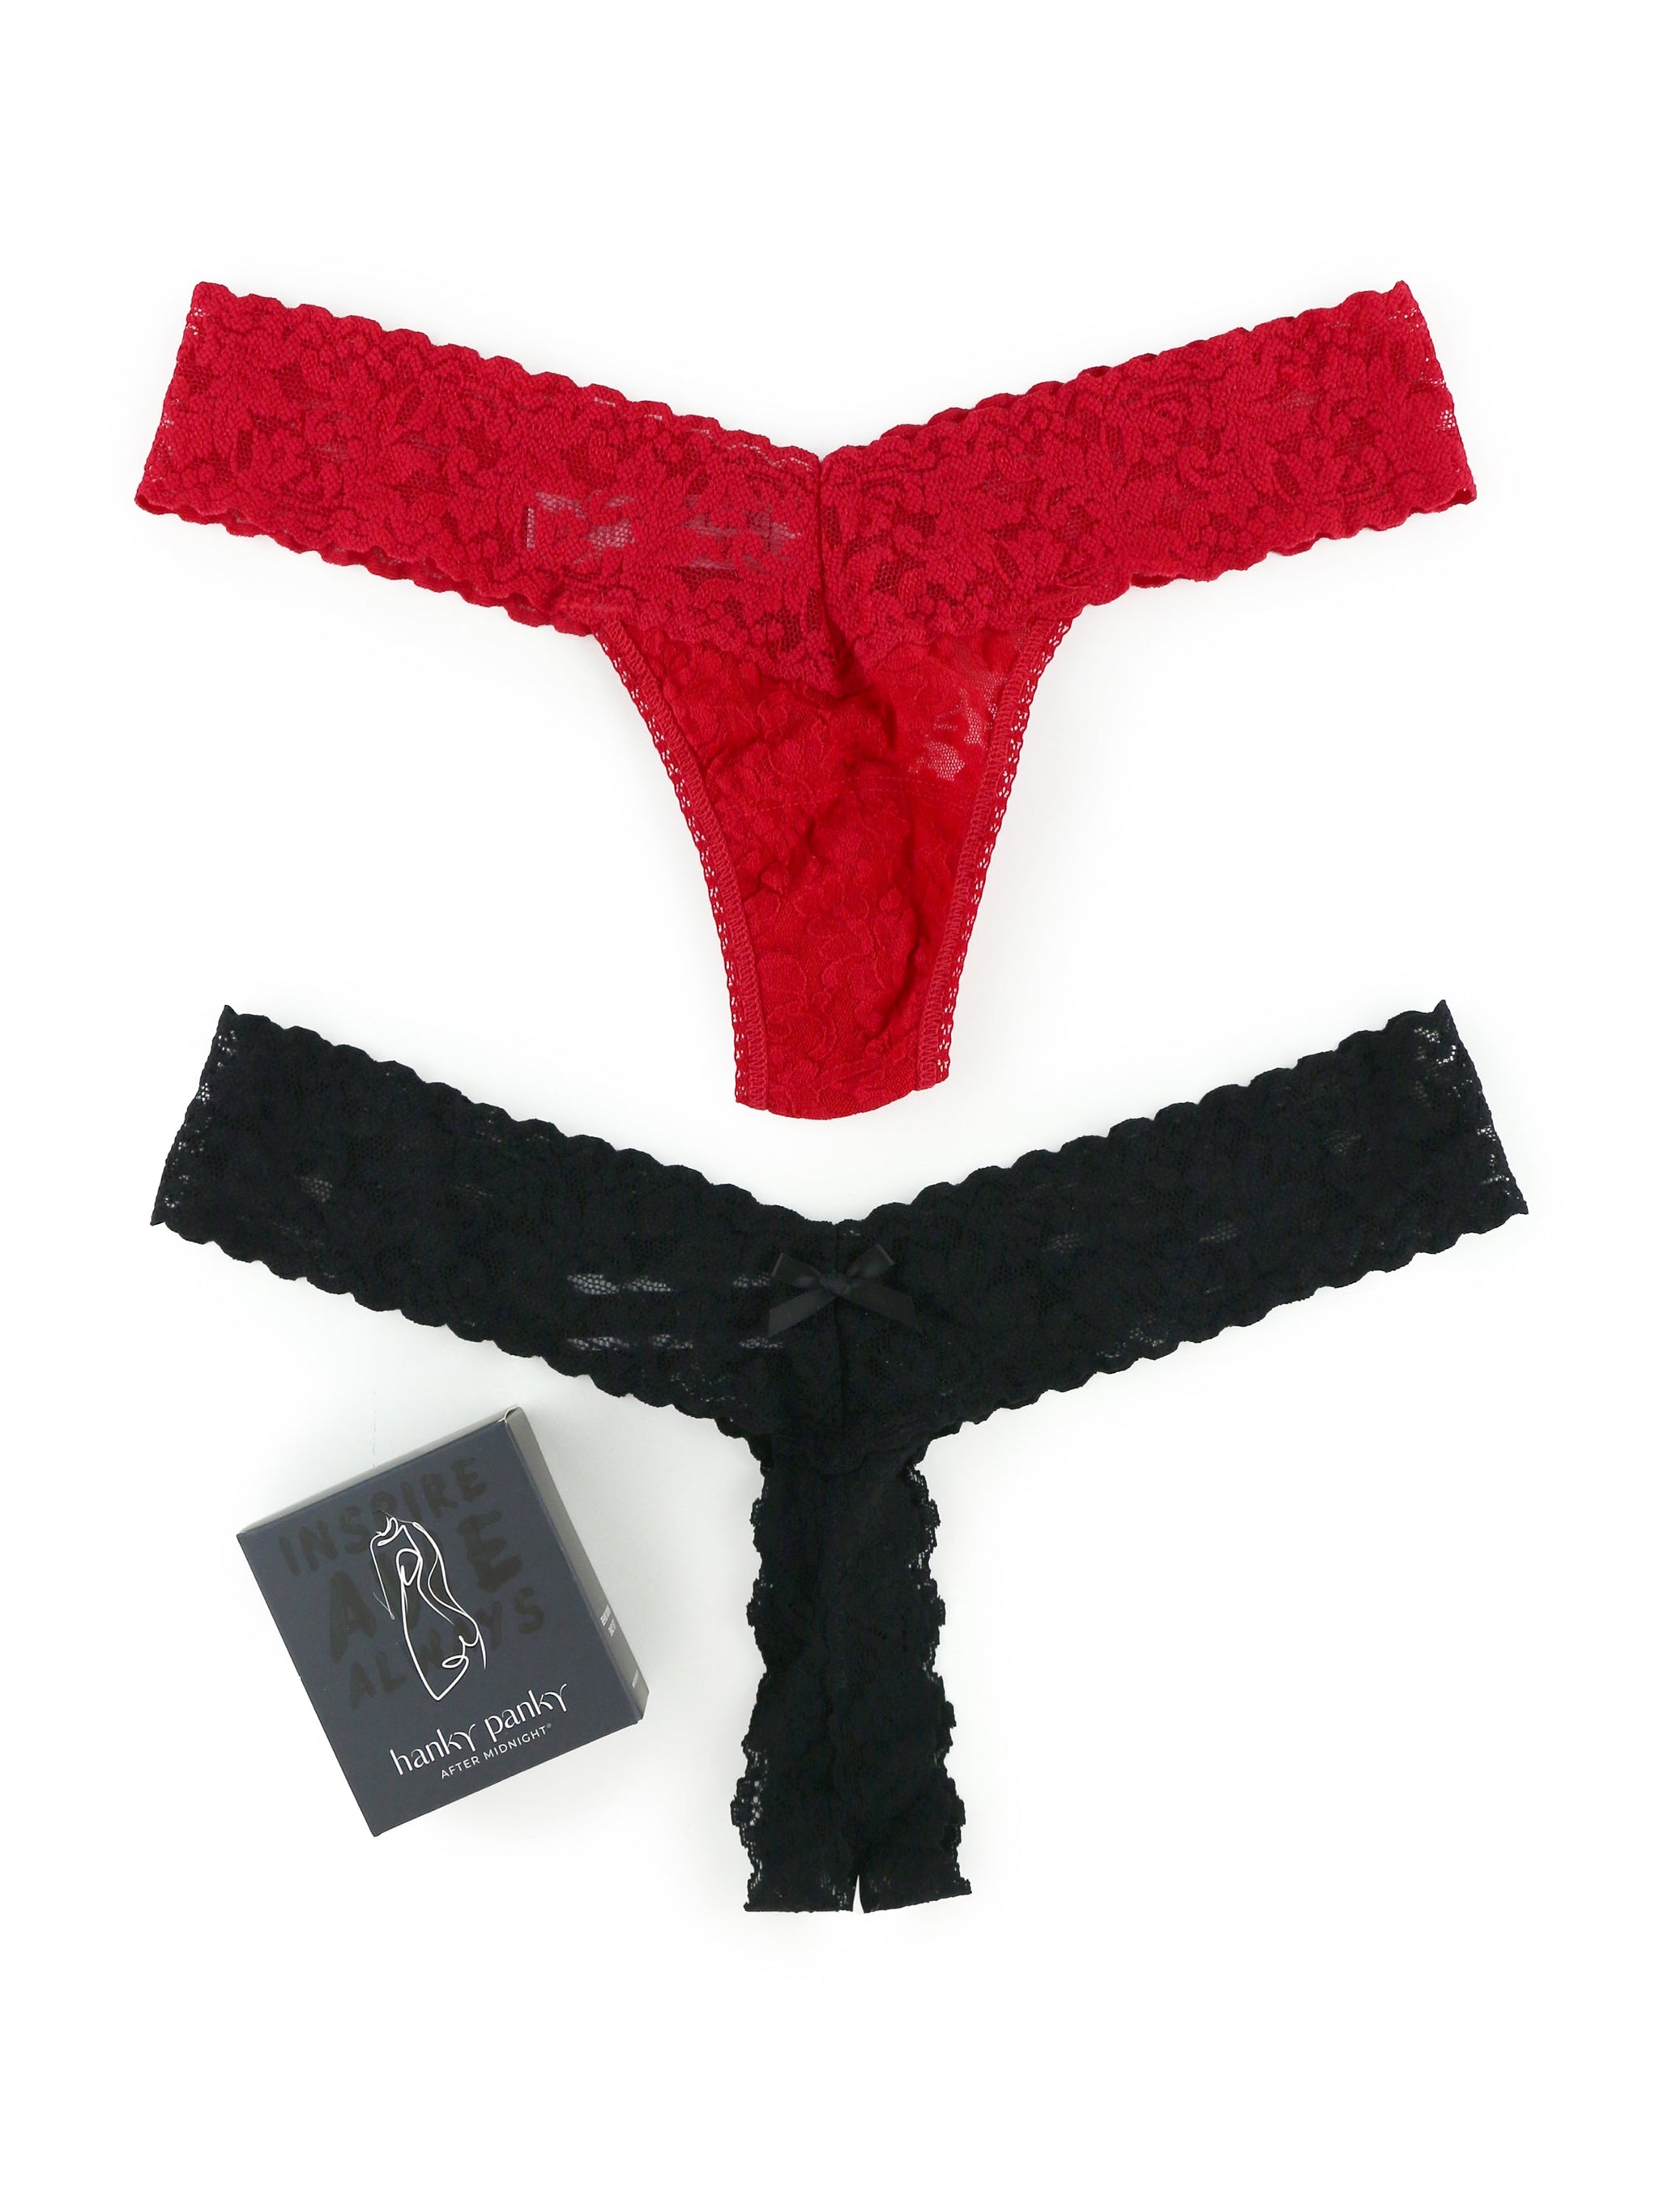 6IXTY8IGHT - Fancy panties for holiday mood 💖 Shop new in panties online  #68Lingerie 🛍bit.ly/3bvvKqK